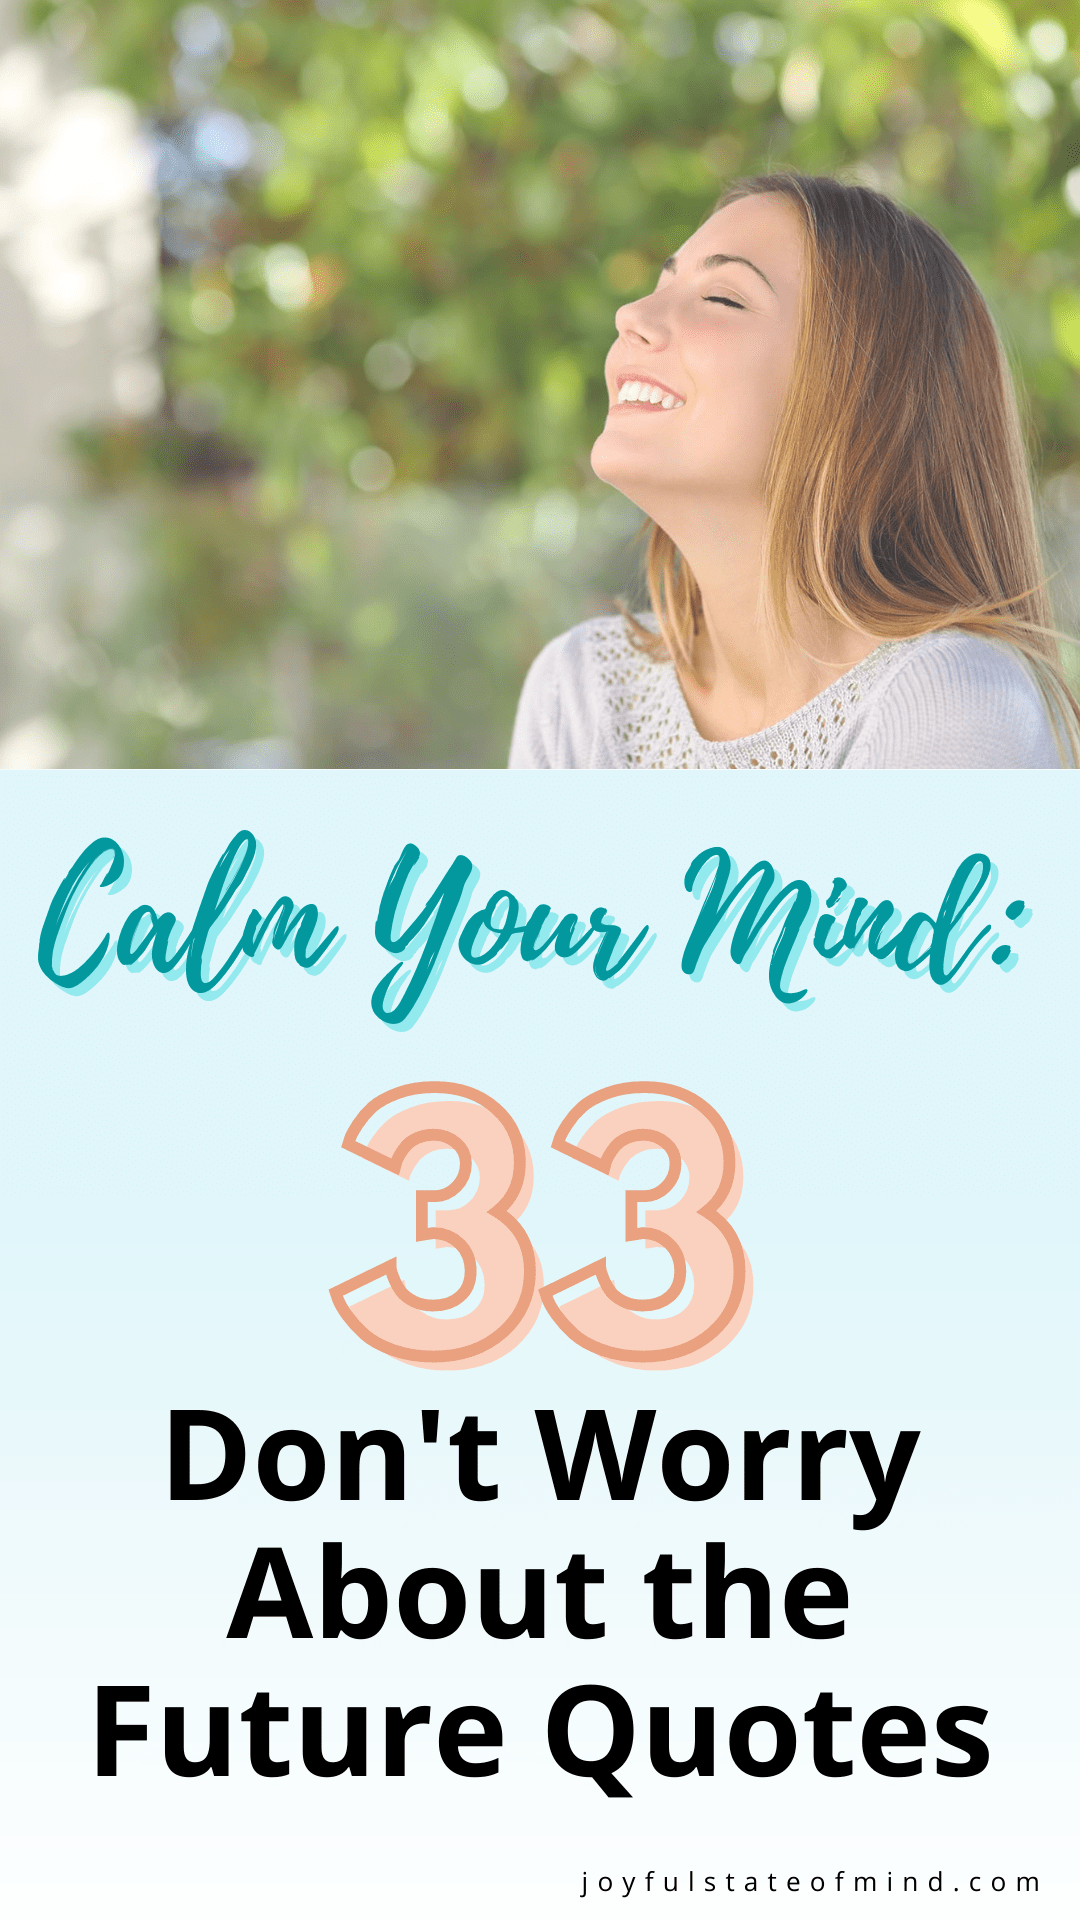 Calm Your Mind: 33 Don't Worry About the Future Quotes - Joyful State ...